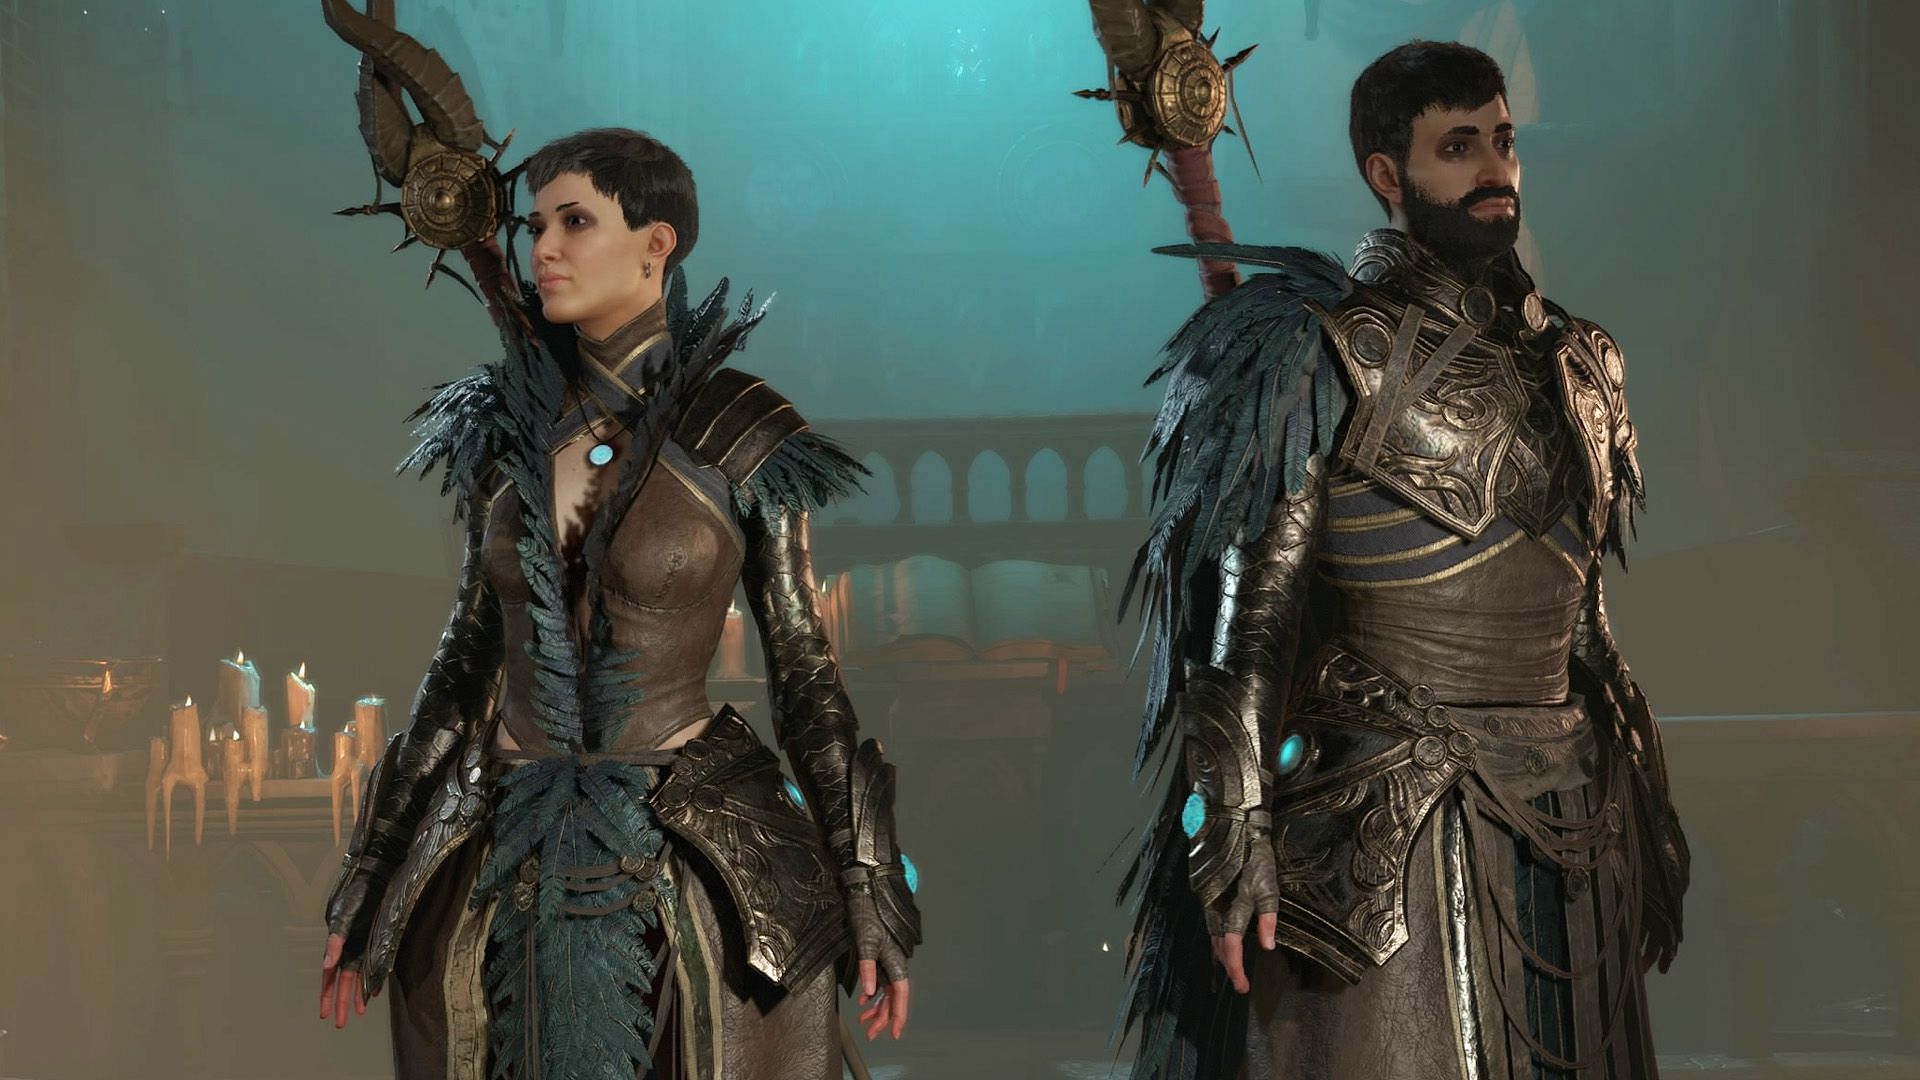 One female Sorcerer on the left and a male Sorcerer on the right in Diablo 4.